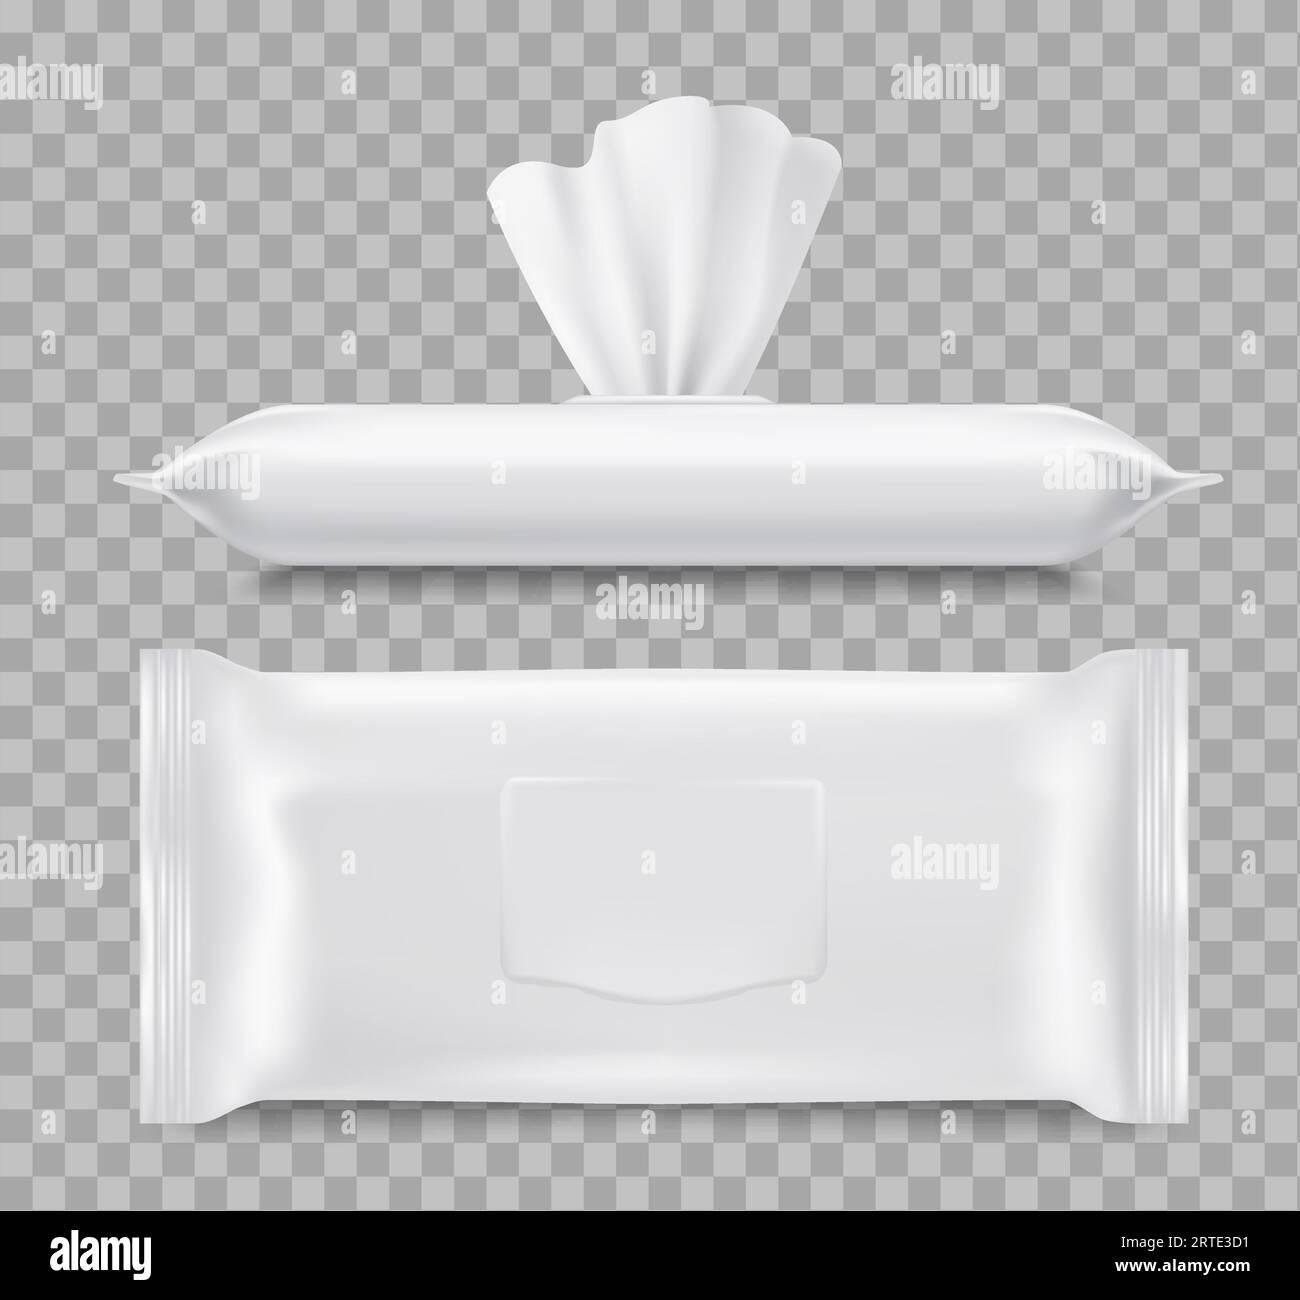 Wet wipes packaging, healthcare 3d vector mockup. Paper or fabric napkins, close and open blank packages with tissue wipes. Hygiene accessories isolated on transparent background, realistic mock up Stock Vector